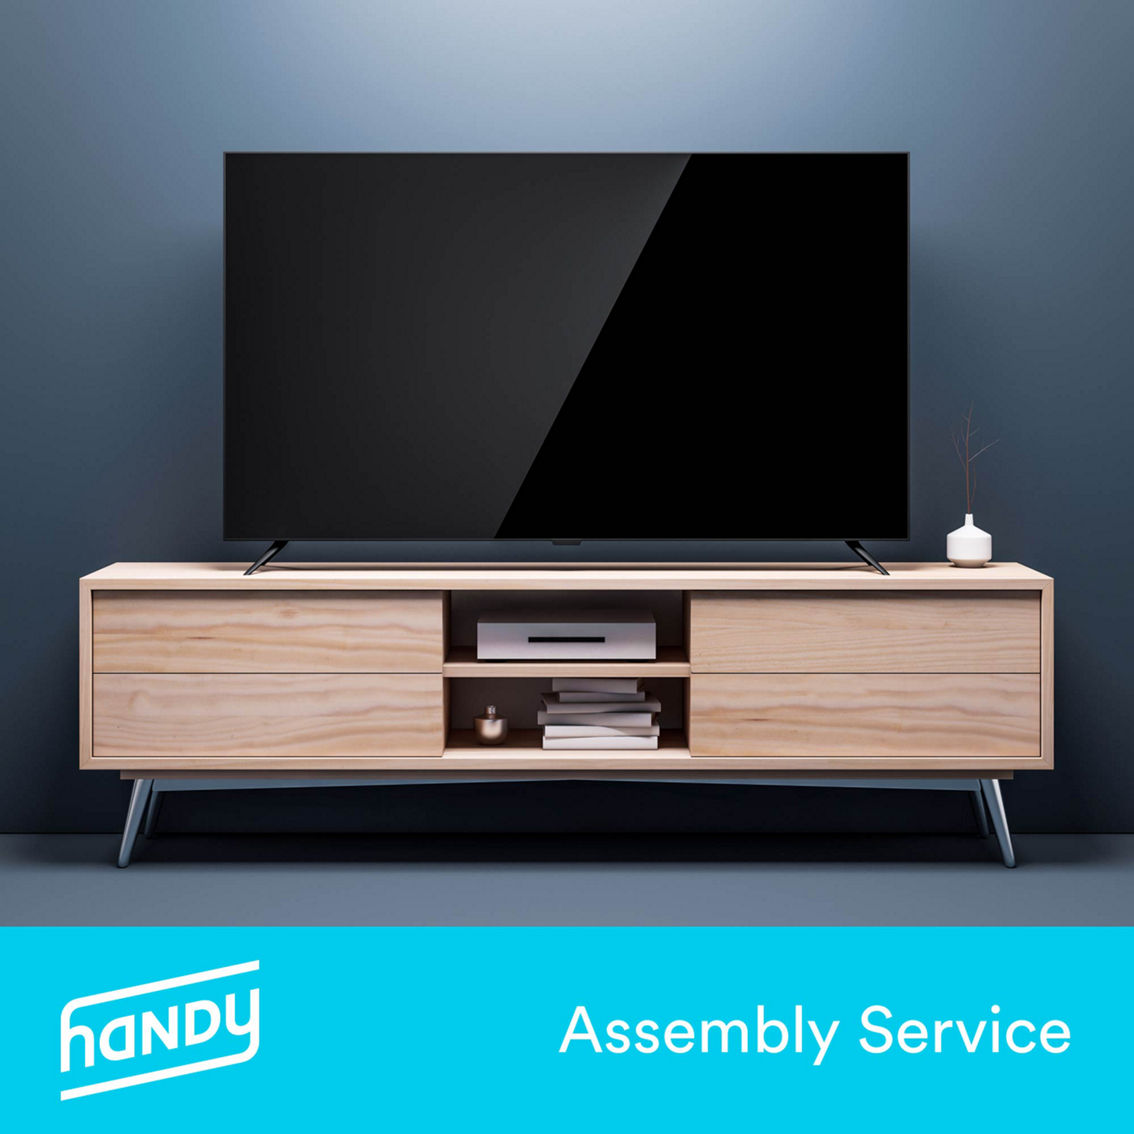 Handy Home Theater System Installation